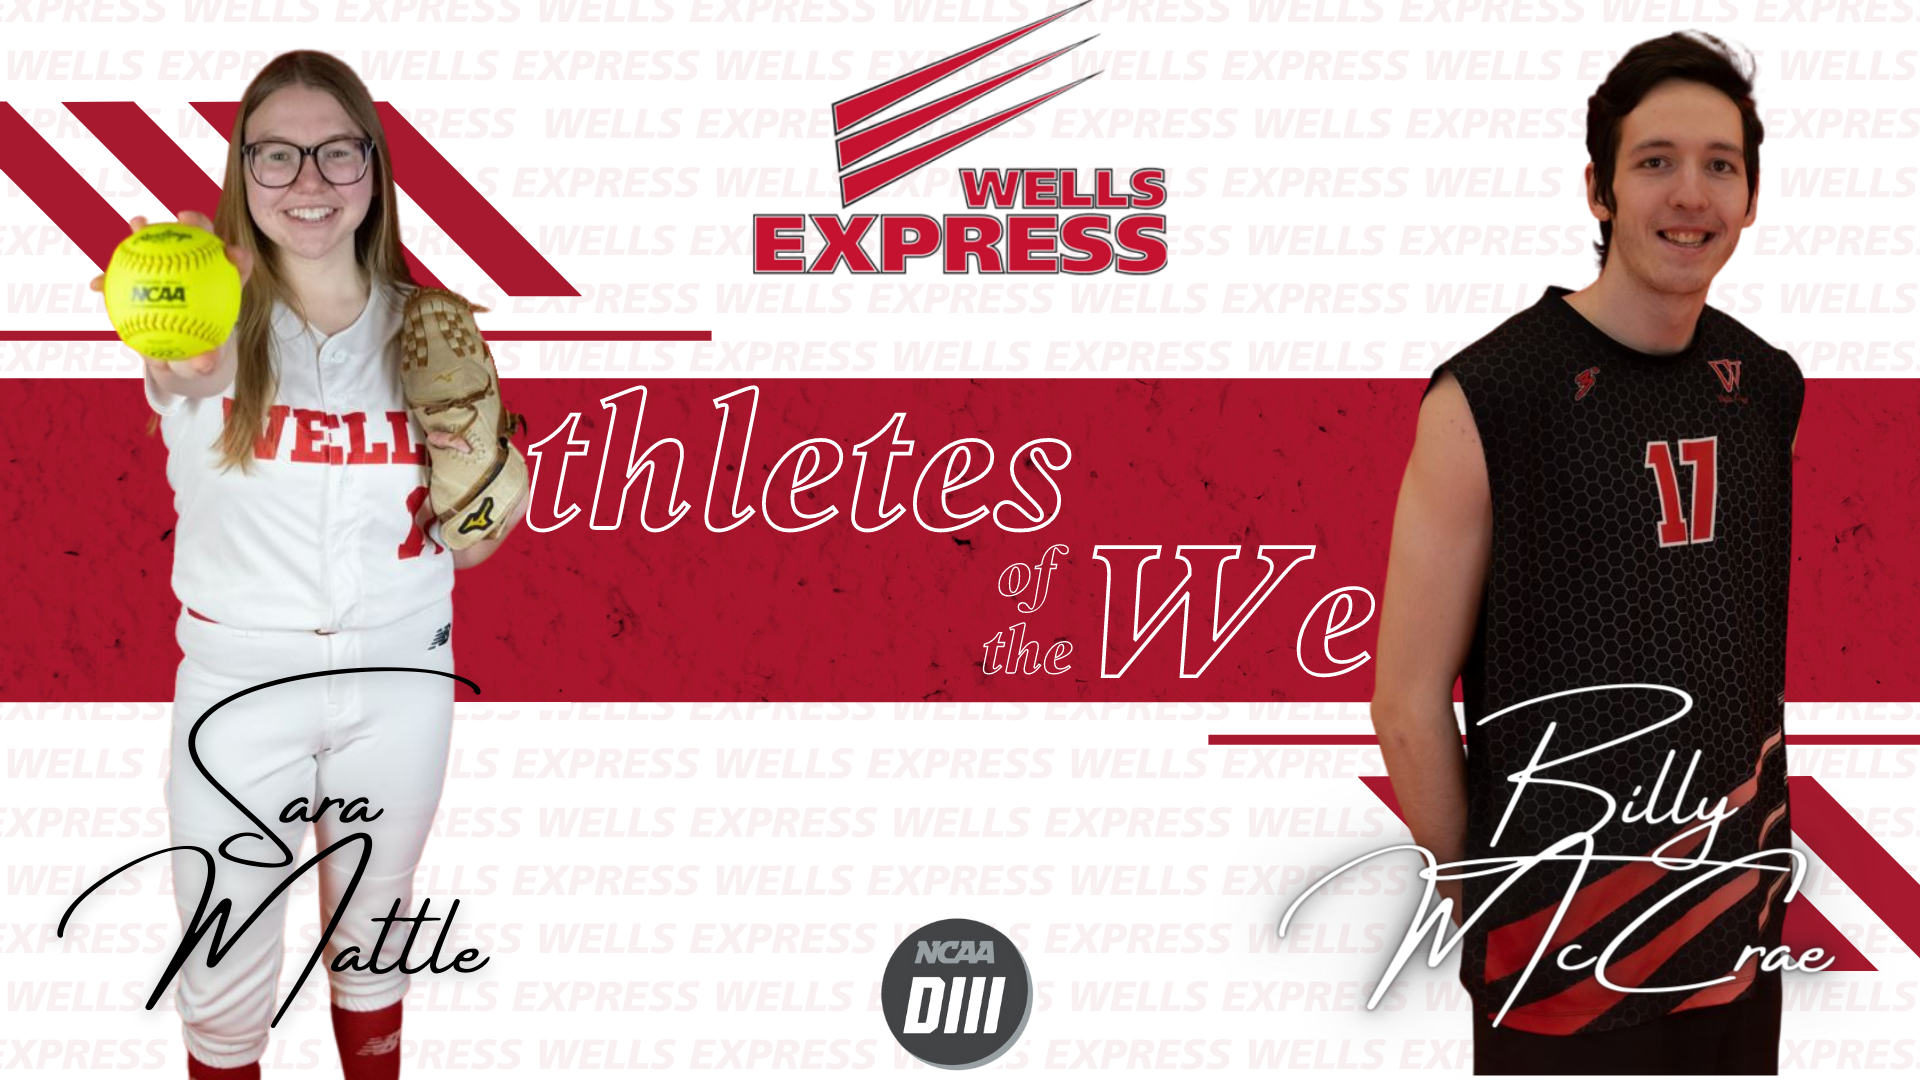 Sara Mattle and Billy McCrae Athletes of the Week 